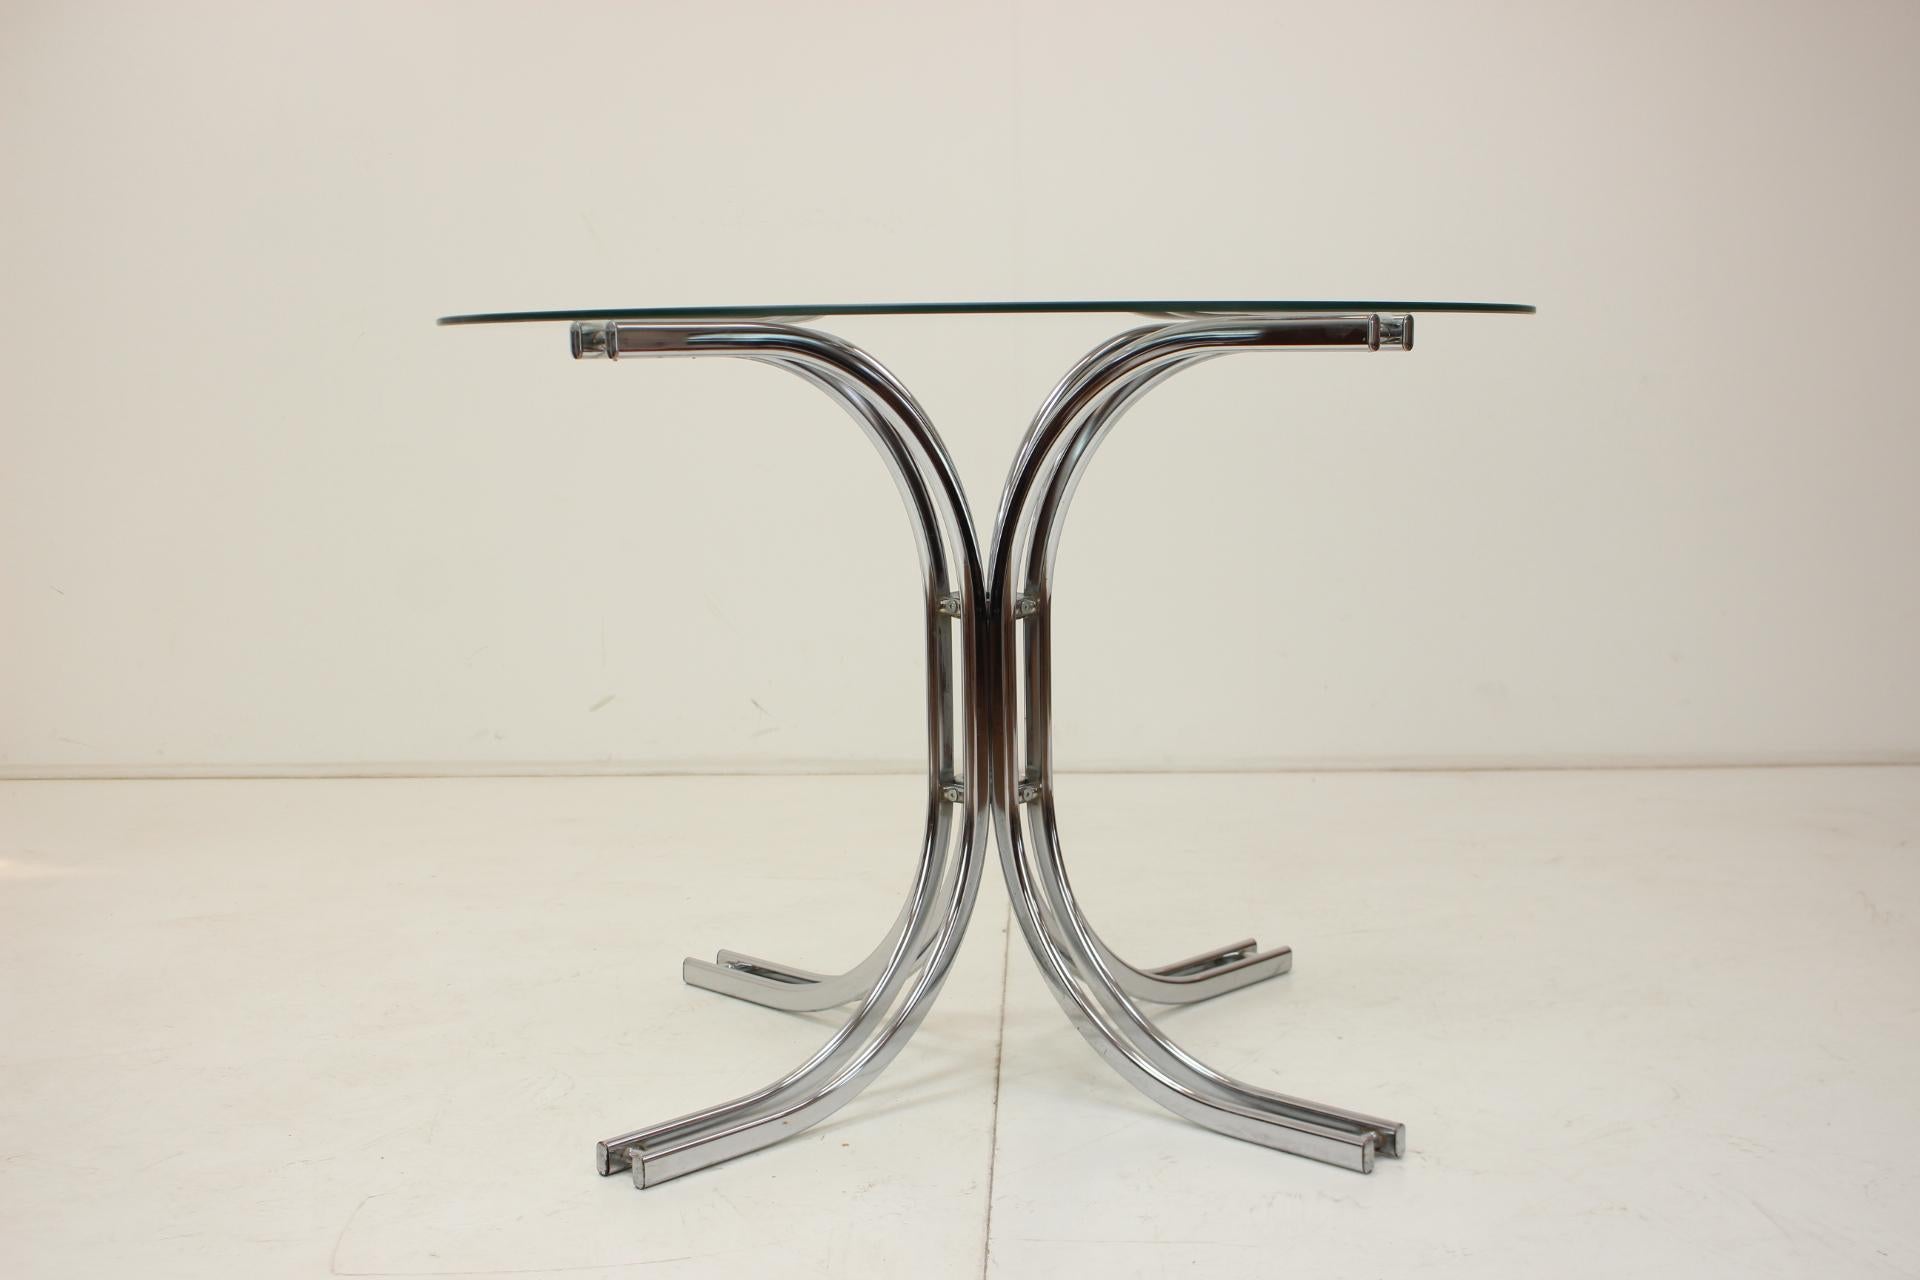 -Chrome has a smaller patina
-Glass on scratches from normal use
-Very design table
- Very good original condition.